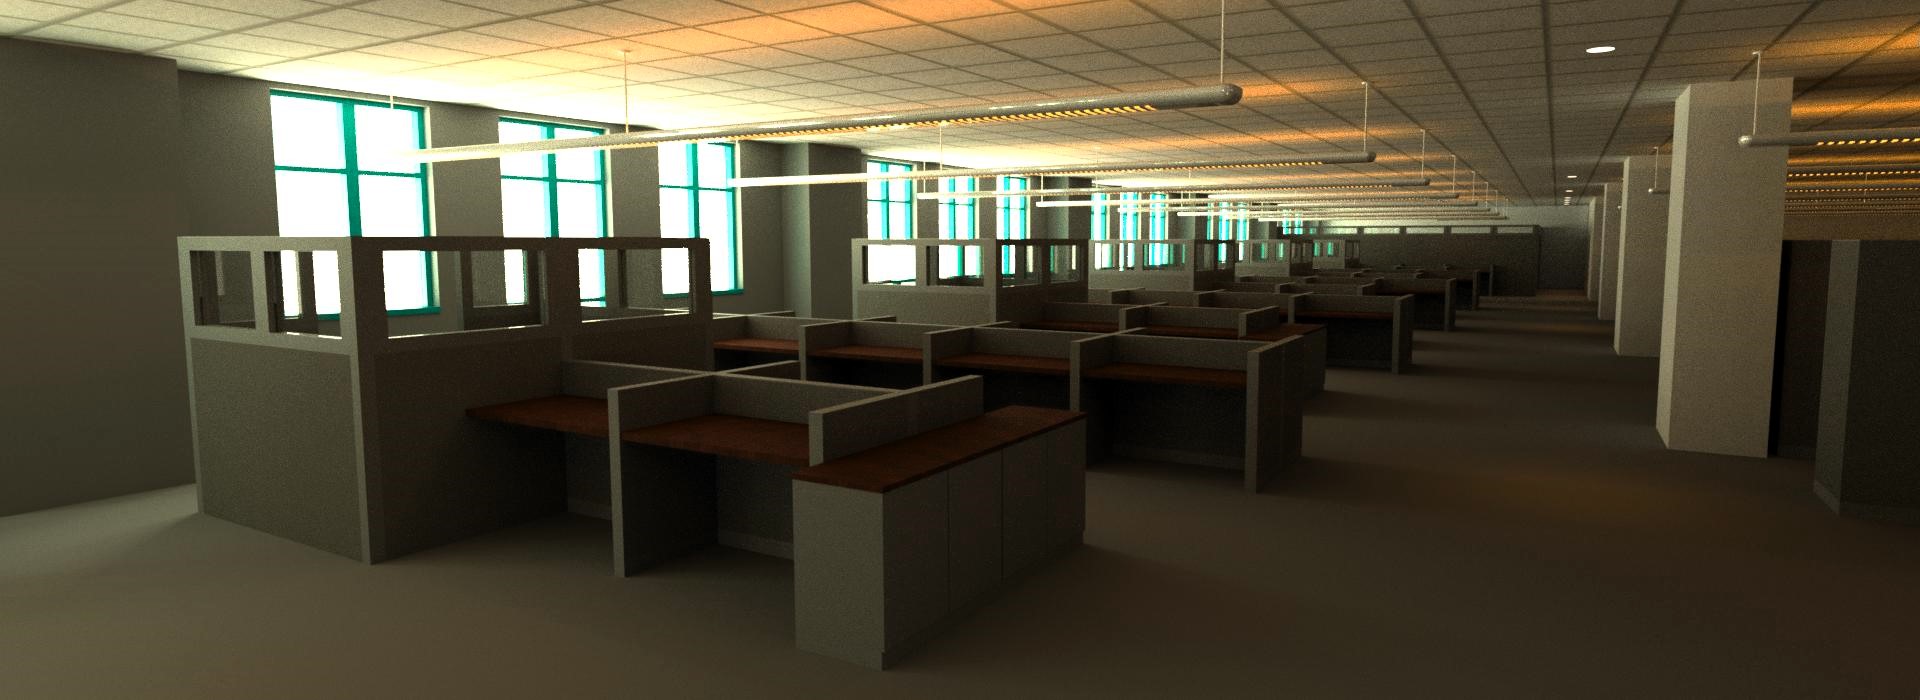 Revit rendering of an office space created from laser scan point cloud. The image shows a row of cubicles along exterior windows. To the right of the cubicles is a walk way with a row of rectangular columns. A second row of cubicles are just to the right of the columns.